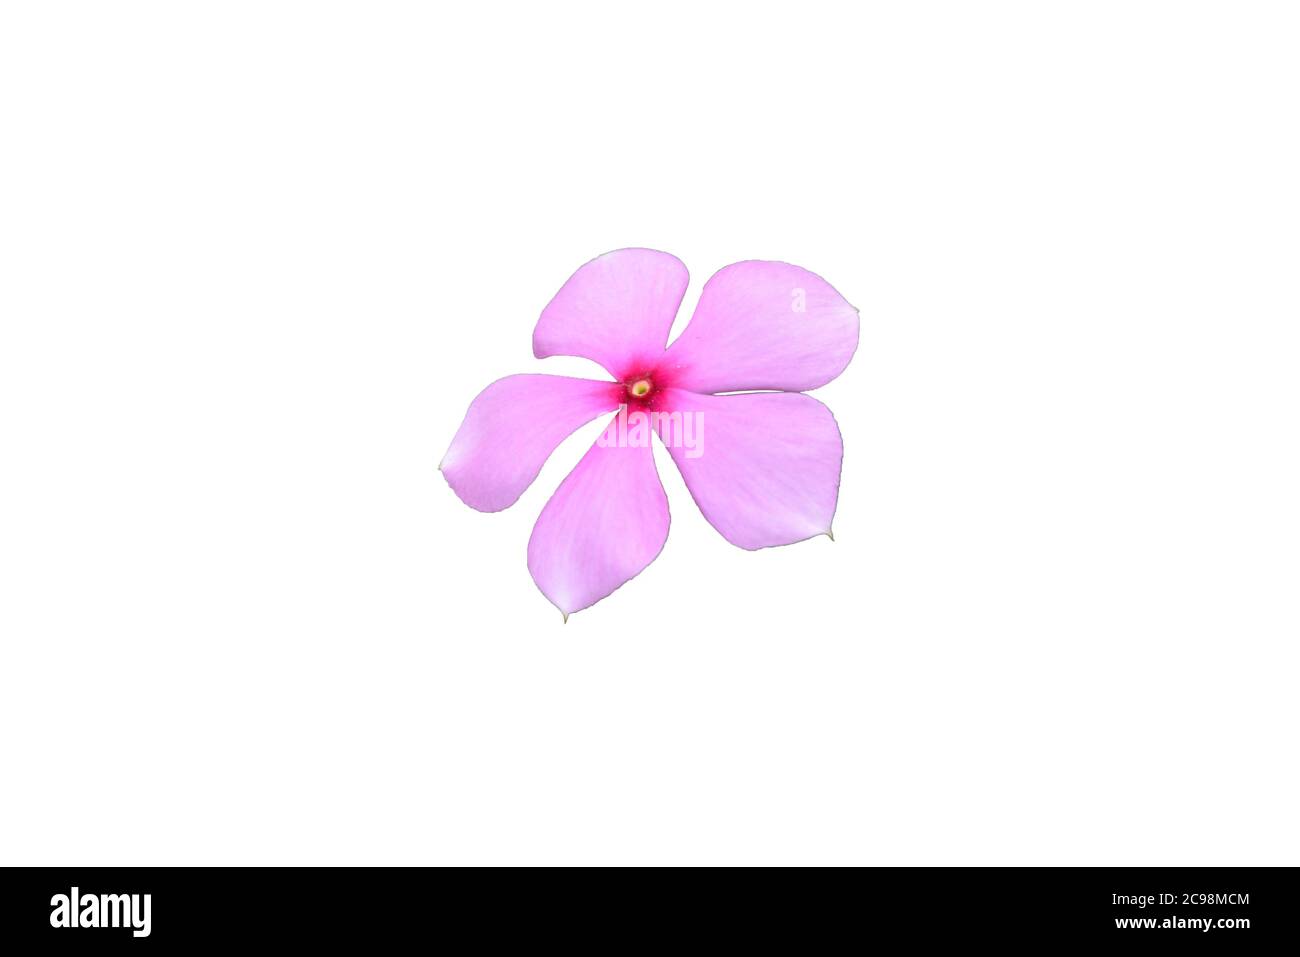 Madagascar Periwinkle or Pink flower isolated  with white background Stock Photo